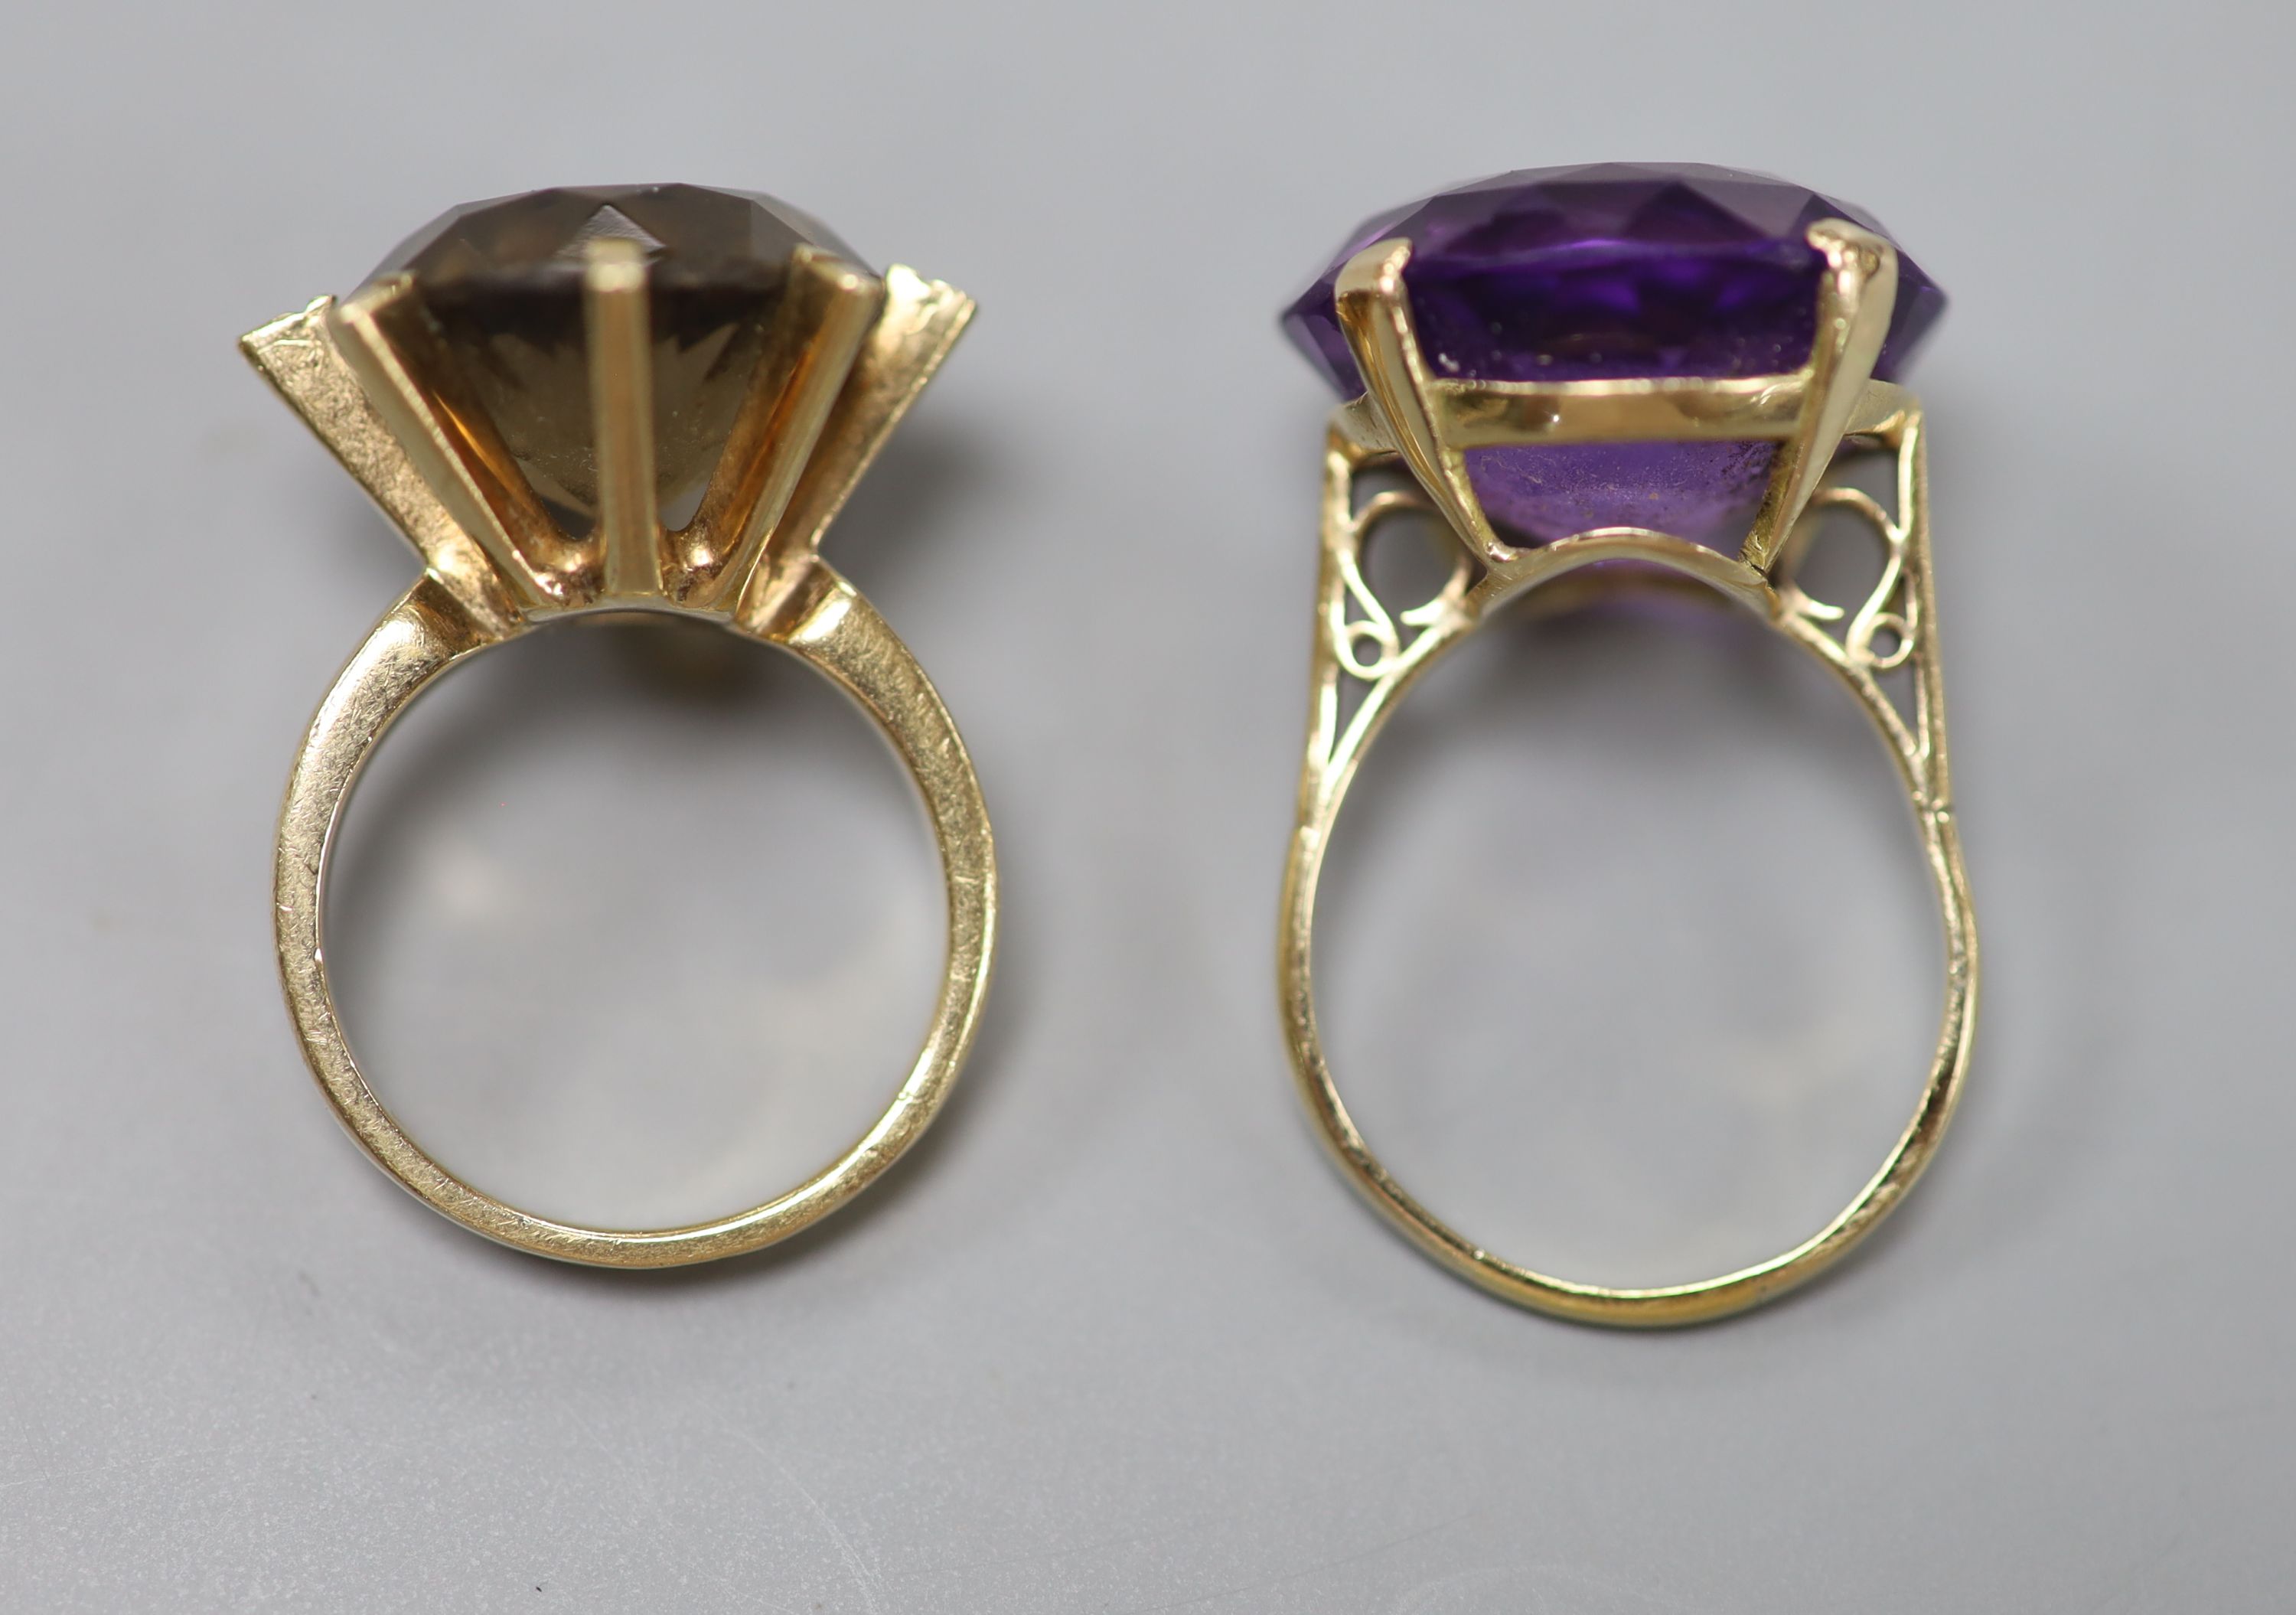 A modern yellow metal and amethyst dress ring and a similar smoky quartz ring, gross 15.2 grams.